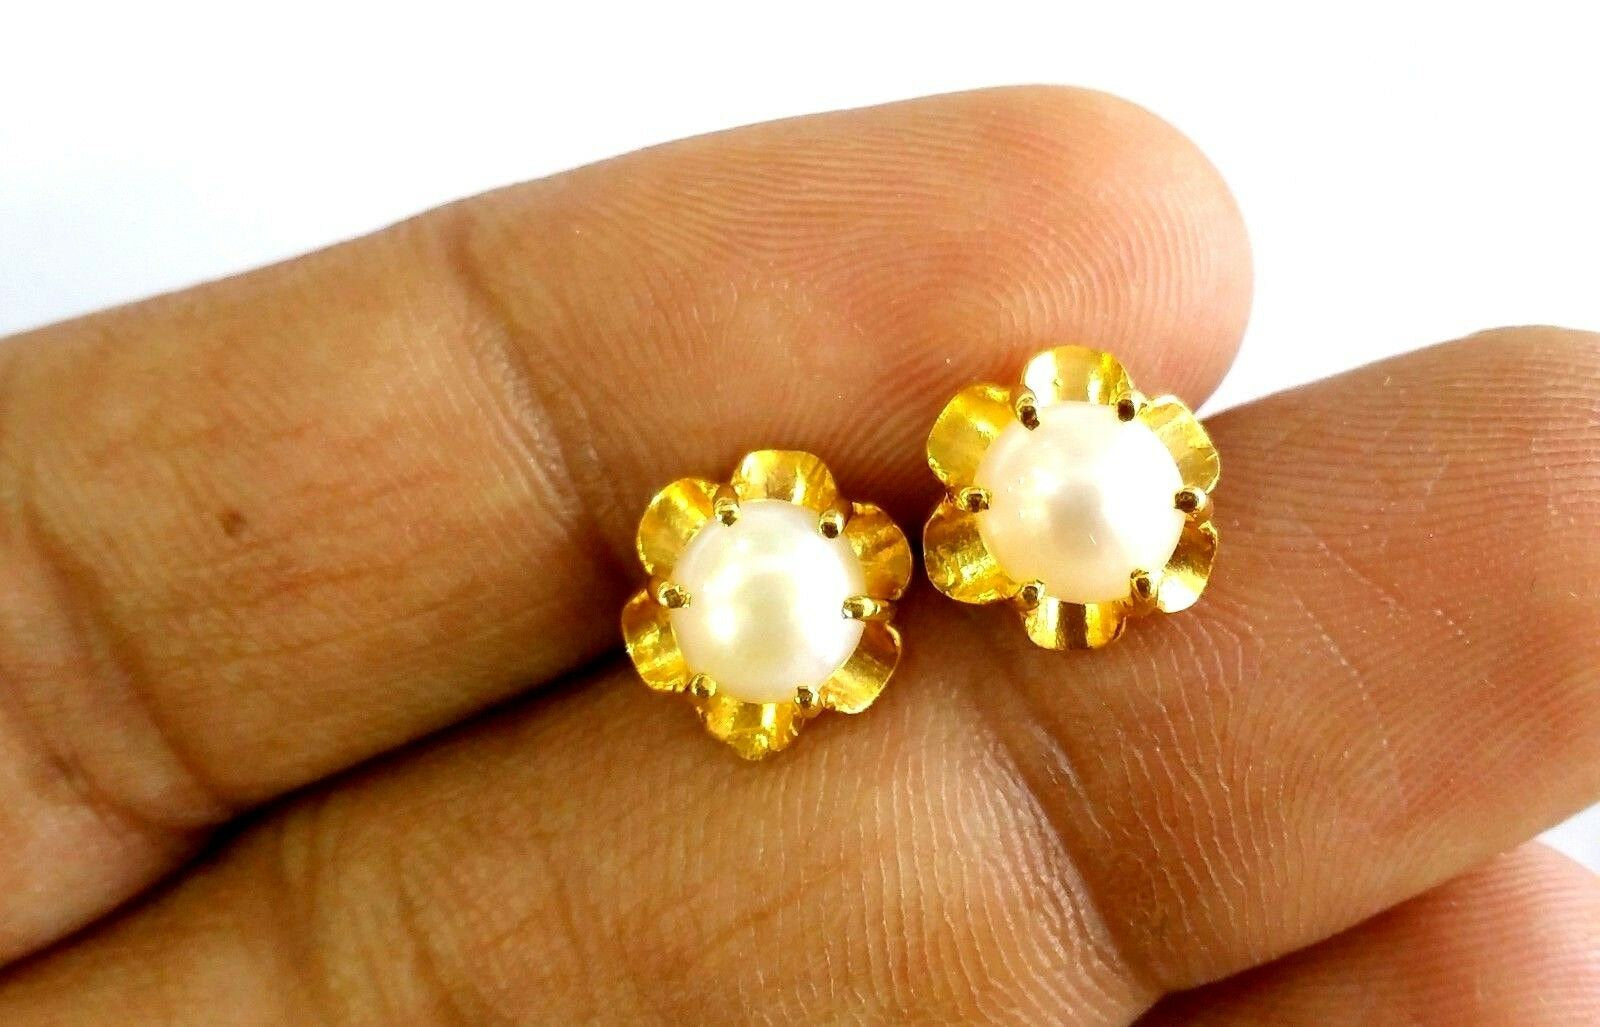 Vintage antique design handmade 22kt yellow gold fabulous pearl stud earring for unisex jewelry from india - TRIBAL ORNAMENTS